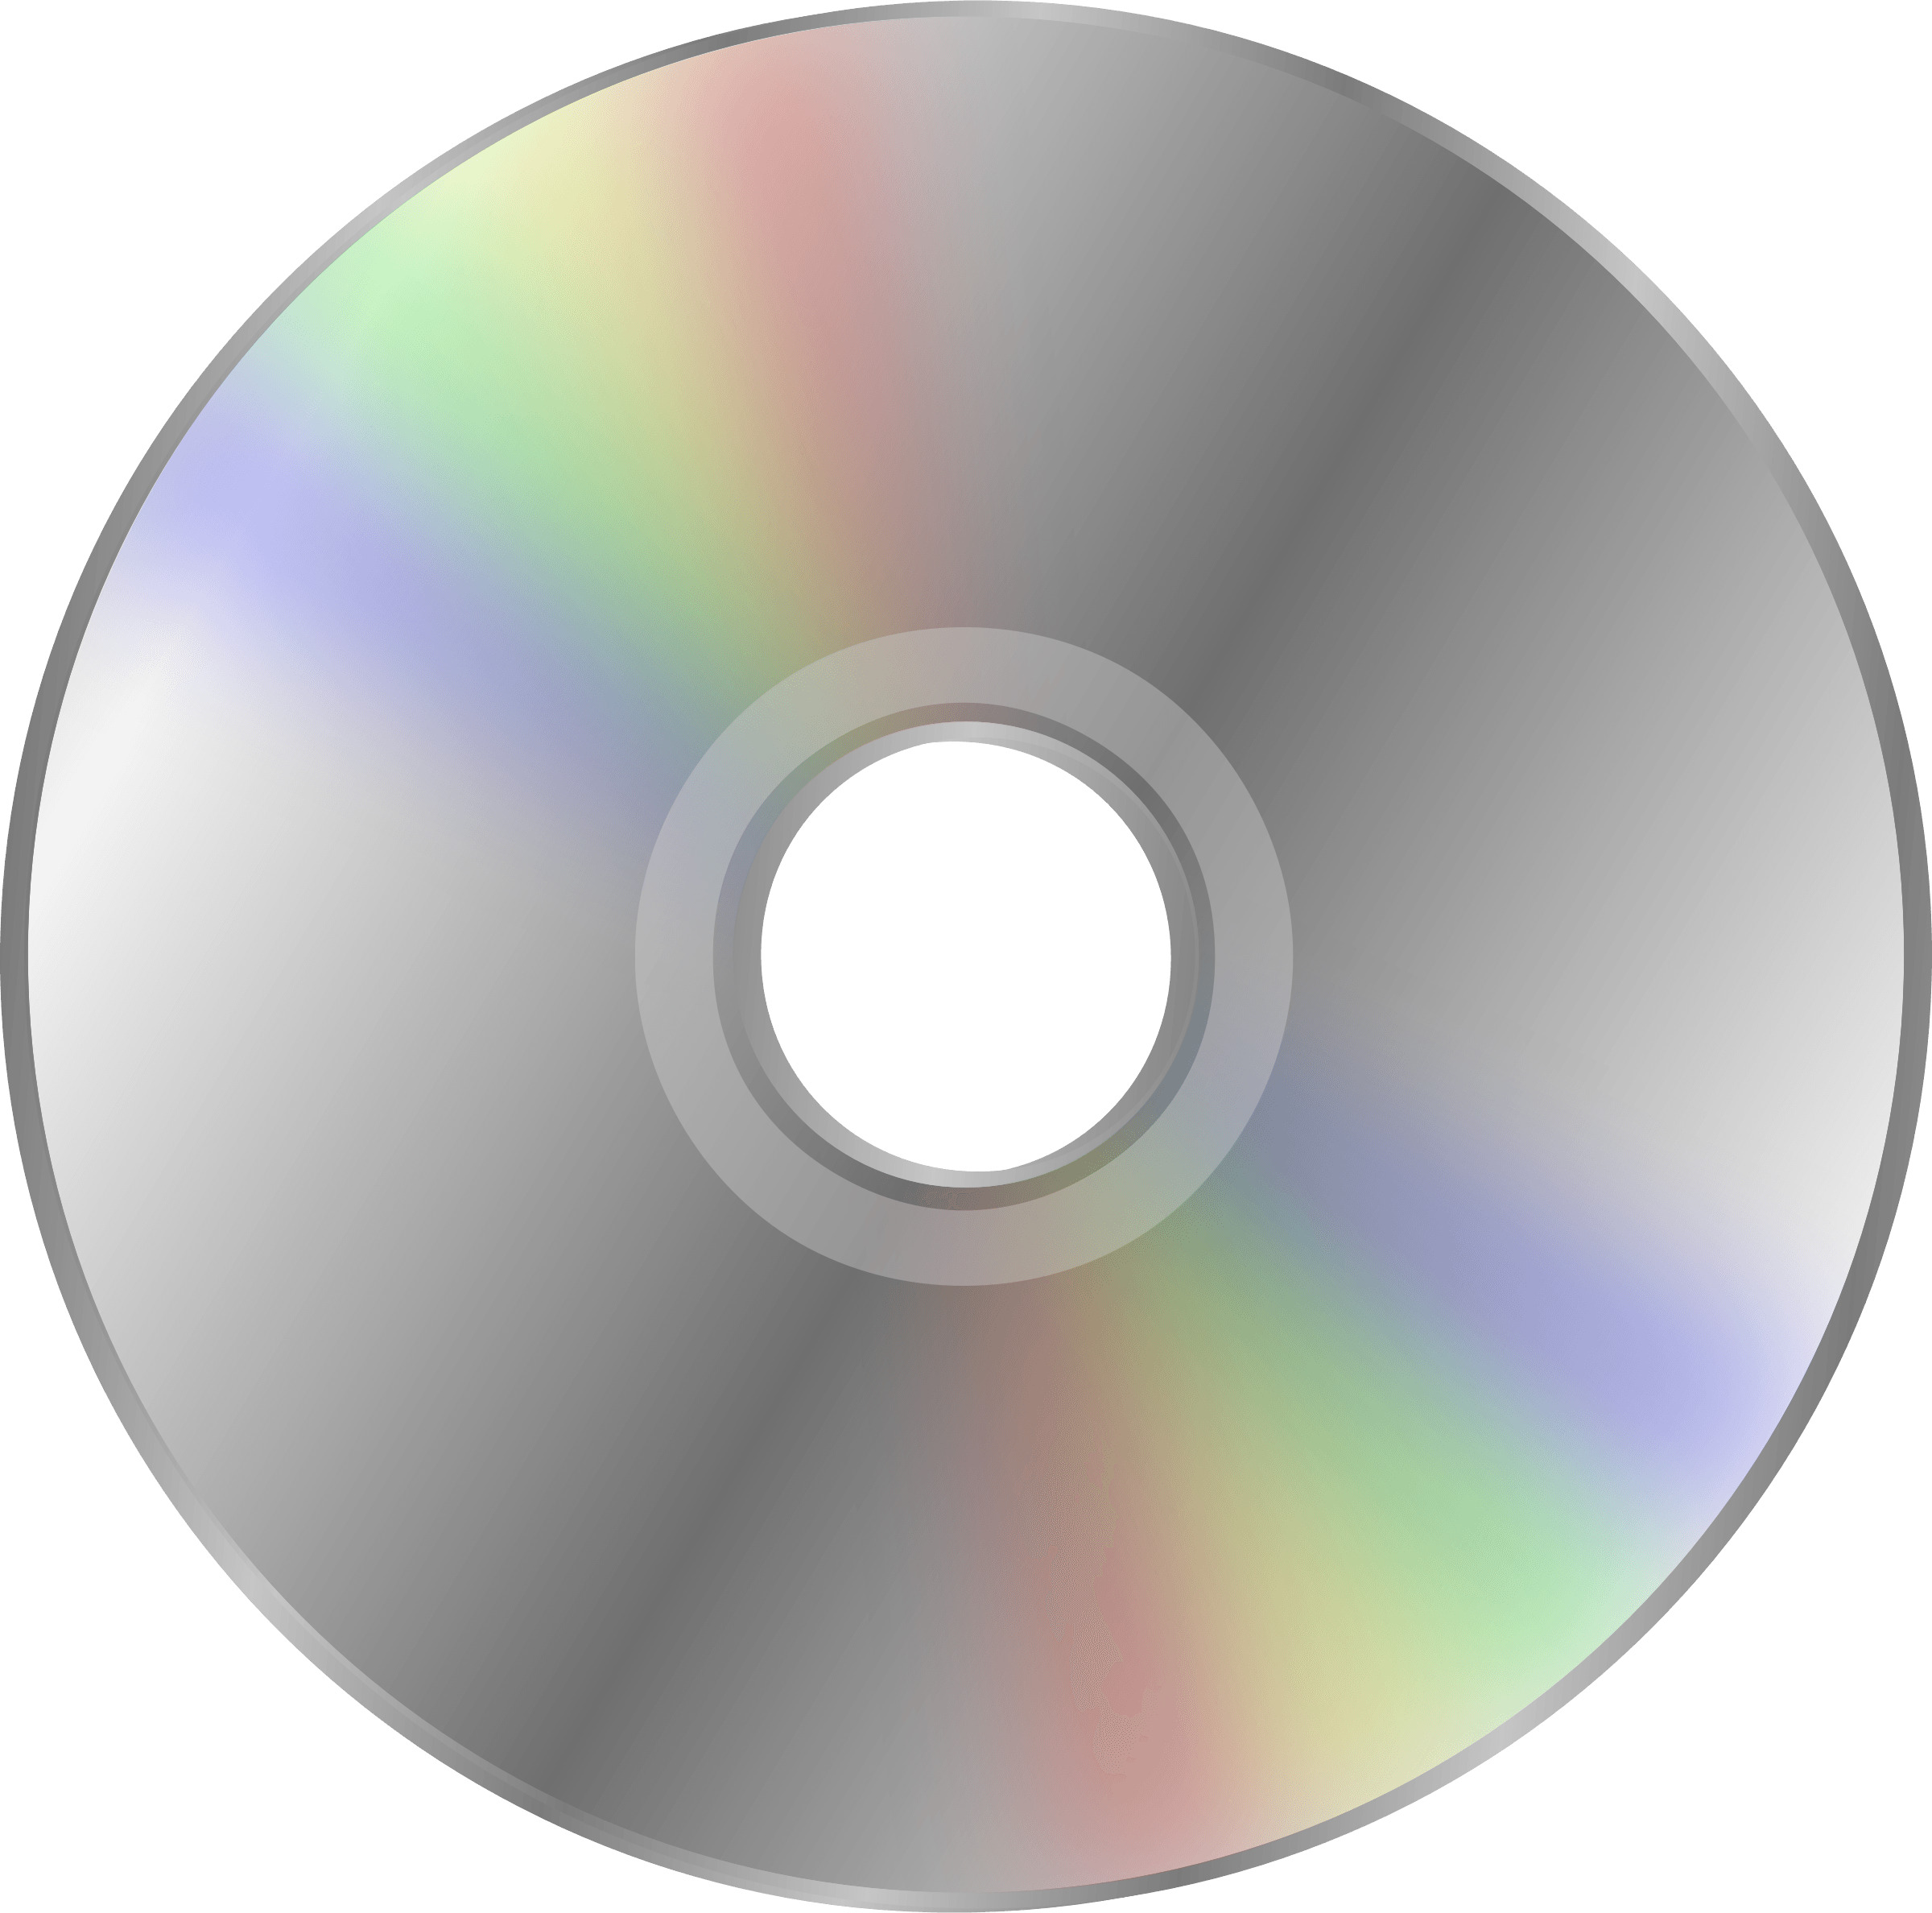 Plastic Cd Compact Disc icons